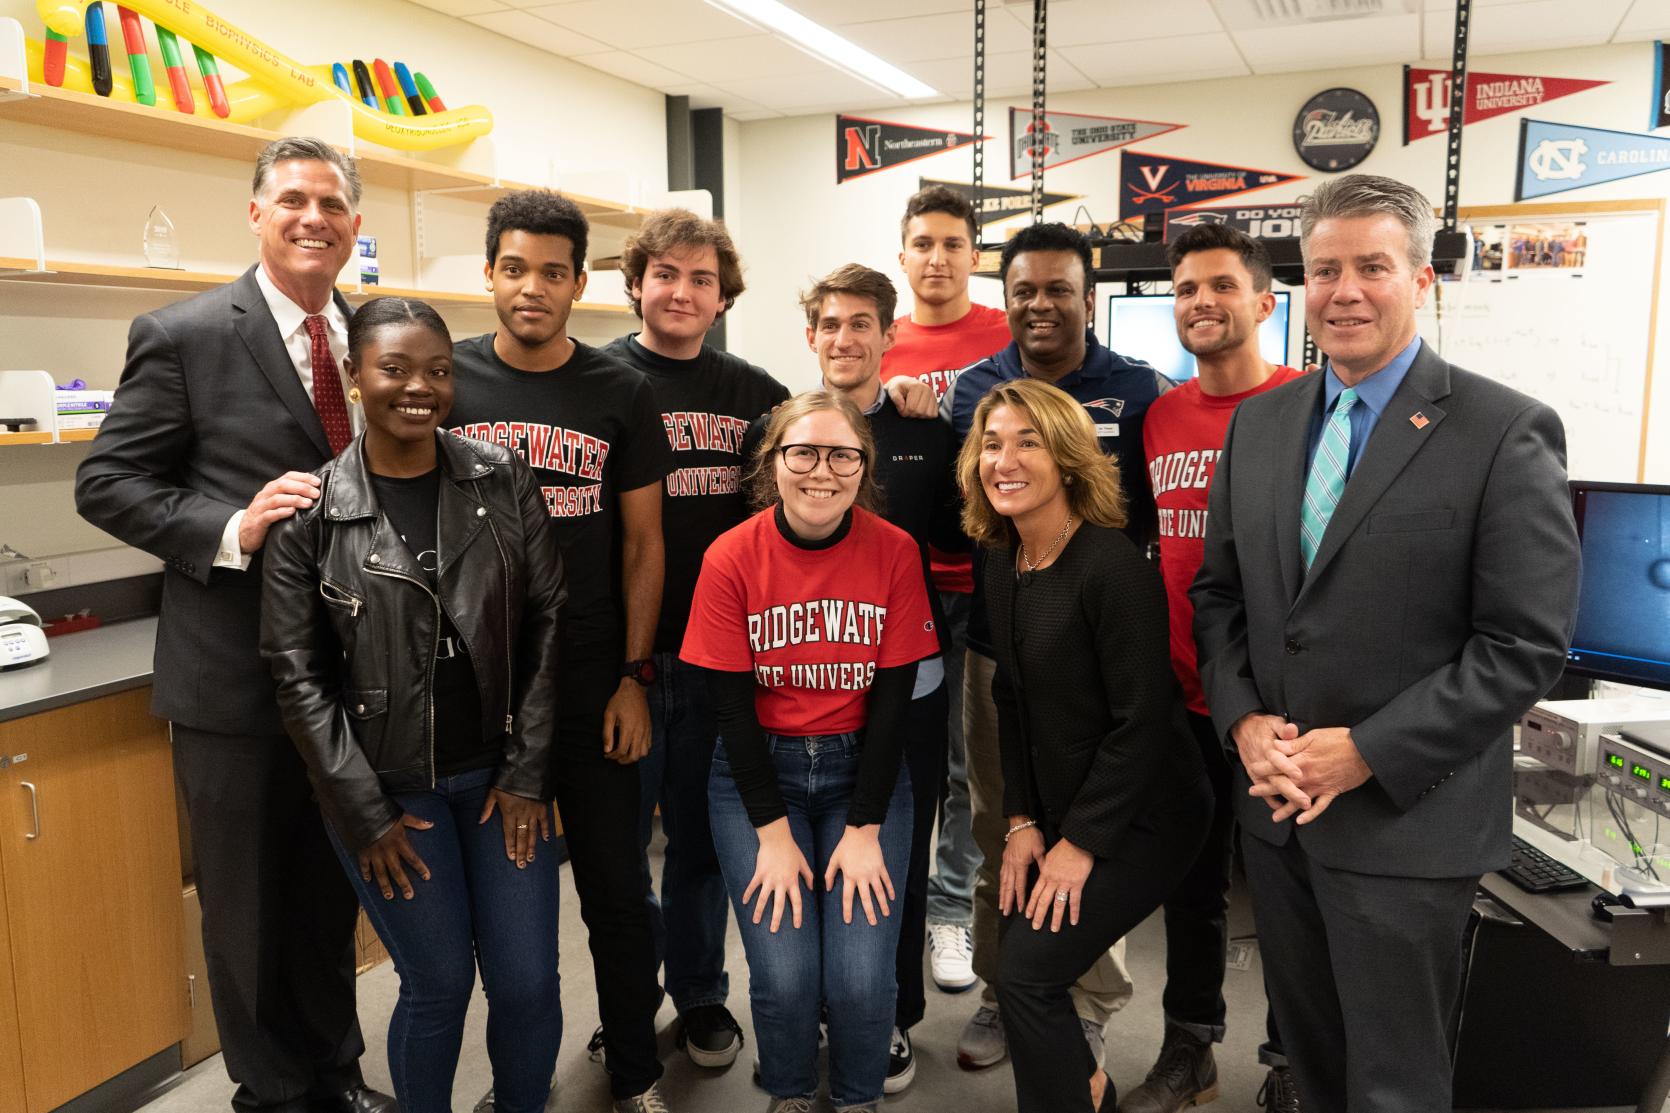 Lt. Governor Karyn Polito was at Bridgewater State to announce two new grants totaling over $5.2 million from the Massachusetts Manufacturing Innovation Initiative (M2I2) to support the development of new advanced manufacturing technologies.